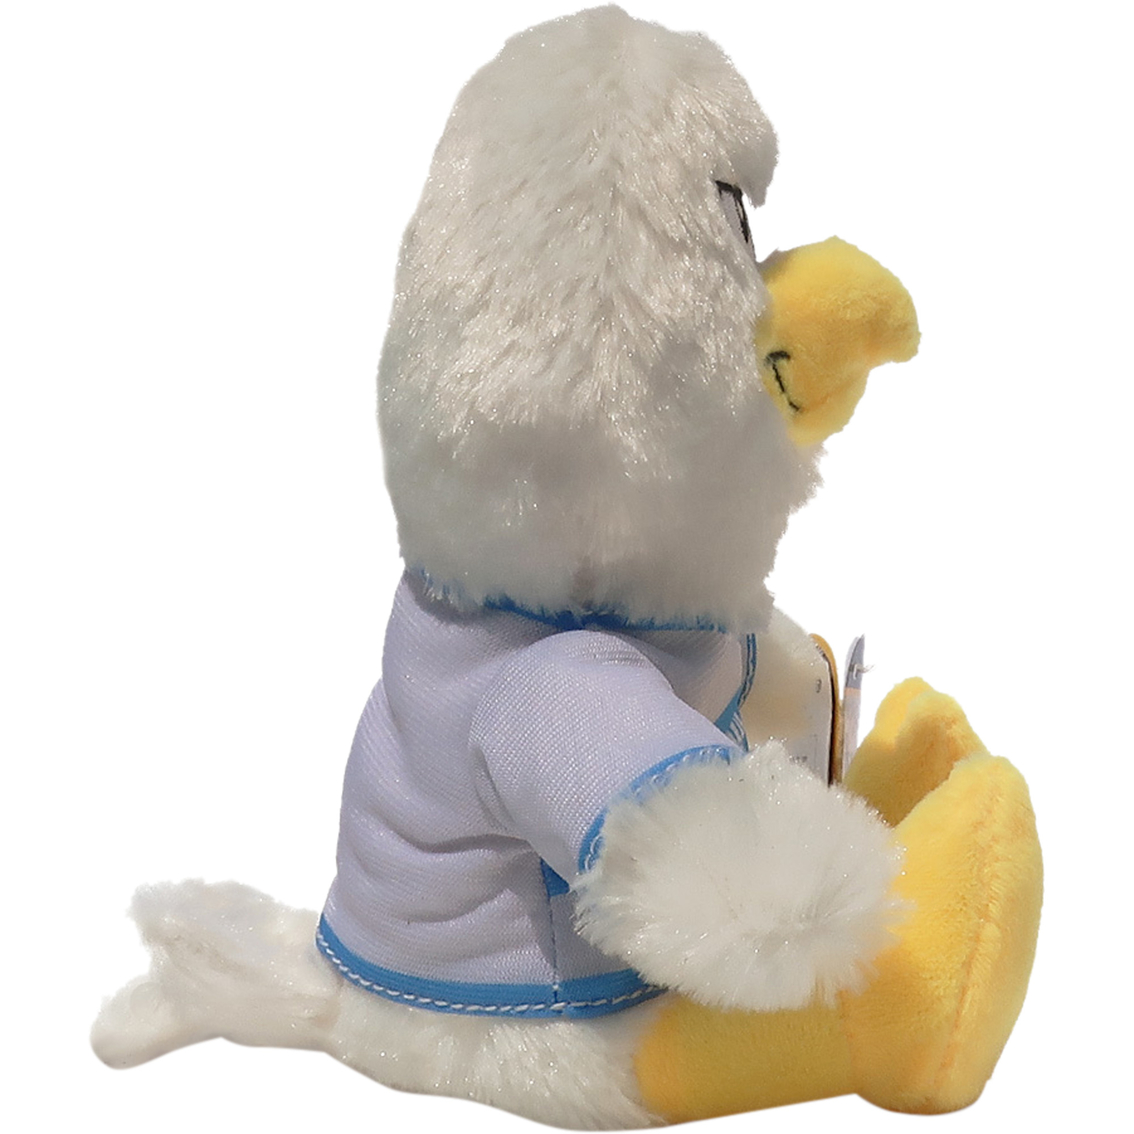 TLJ Marketing & Sales Plush 6 in. Military Mascots - Image 4 of 4